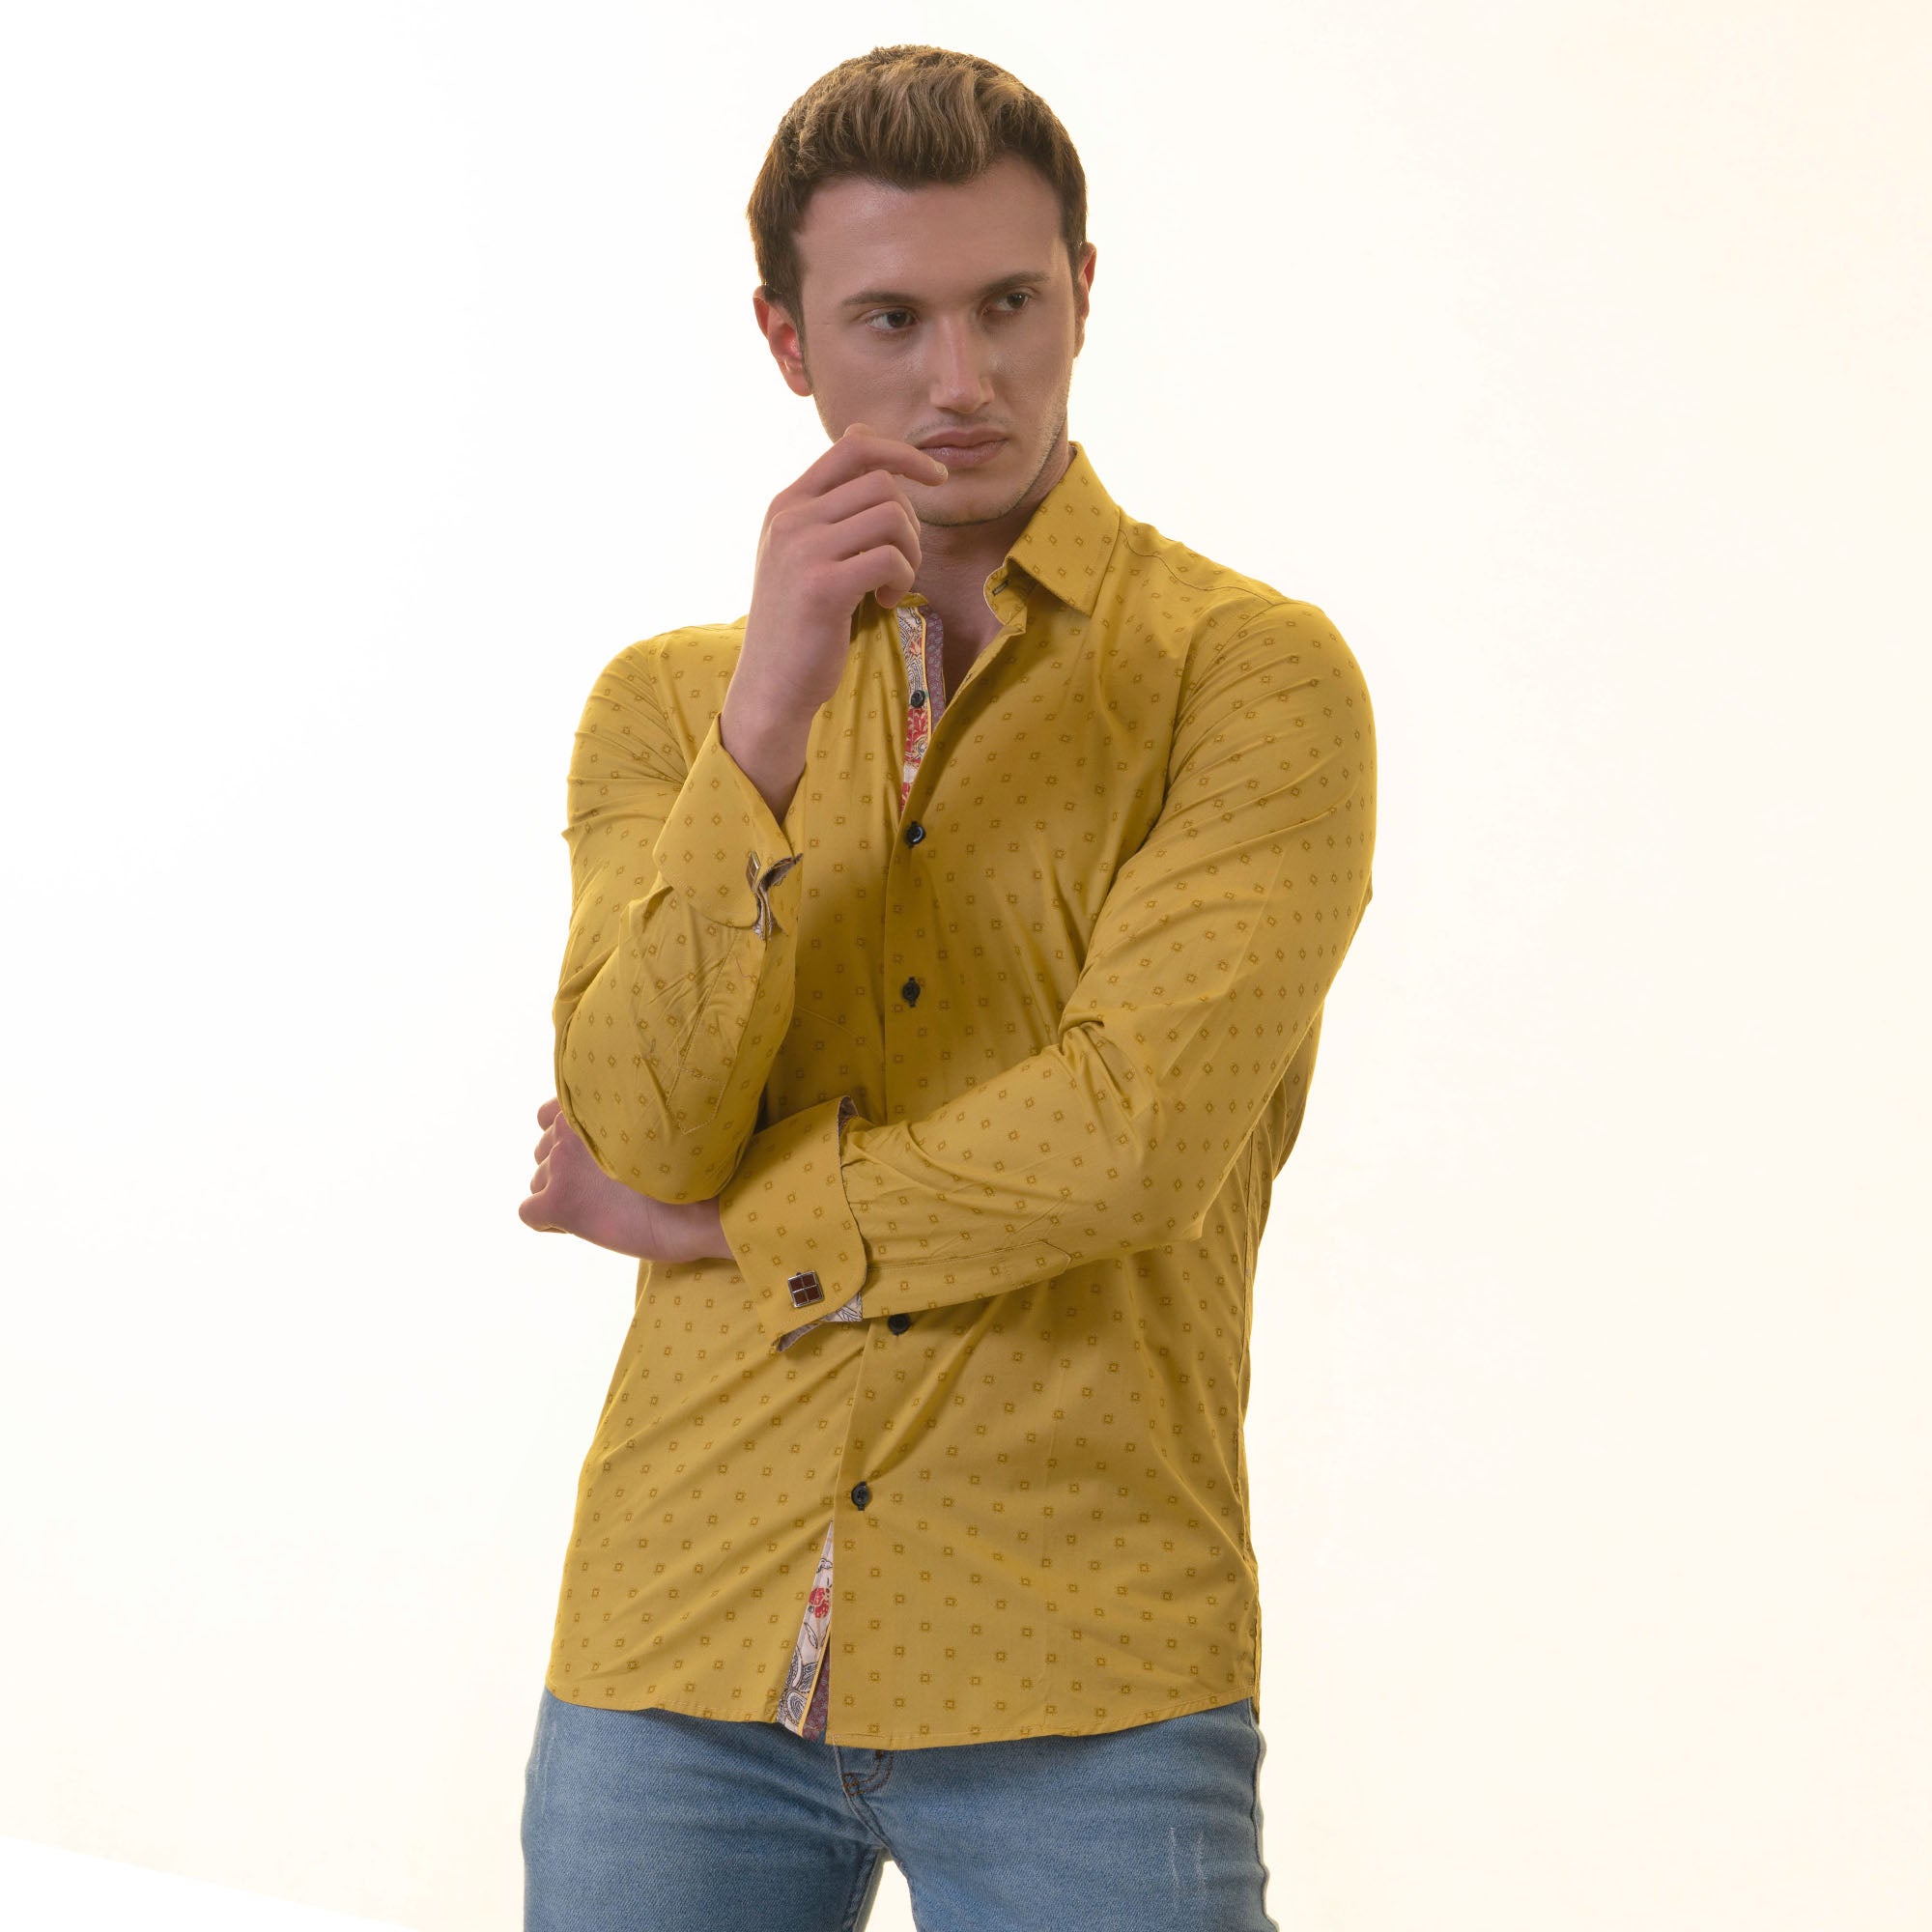 Mustard Printed inside Paisley Mens Slim Fit Designer French Cuff Shirt - tailored Cotton Shirts for Work and Casual Wear